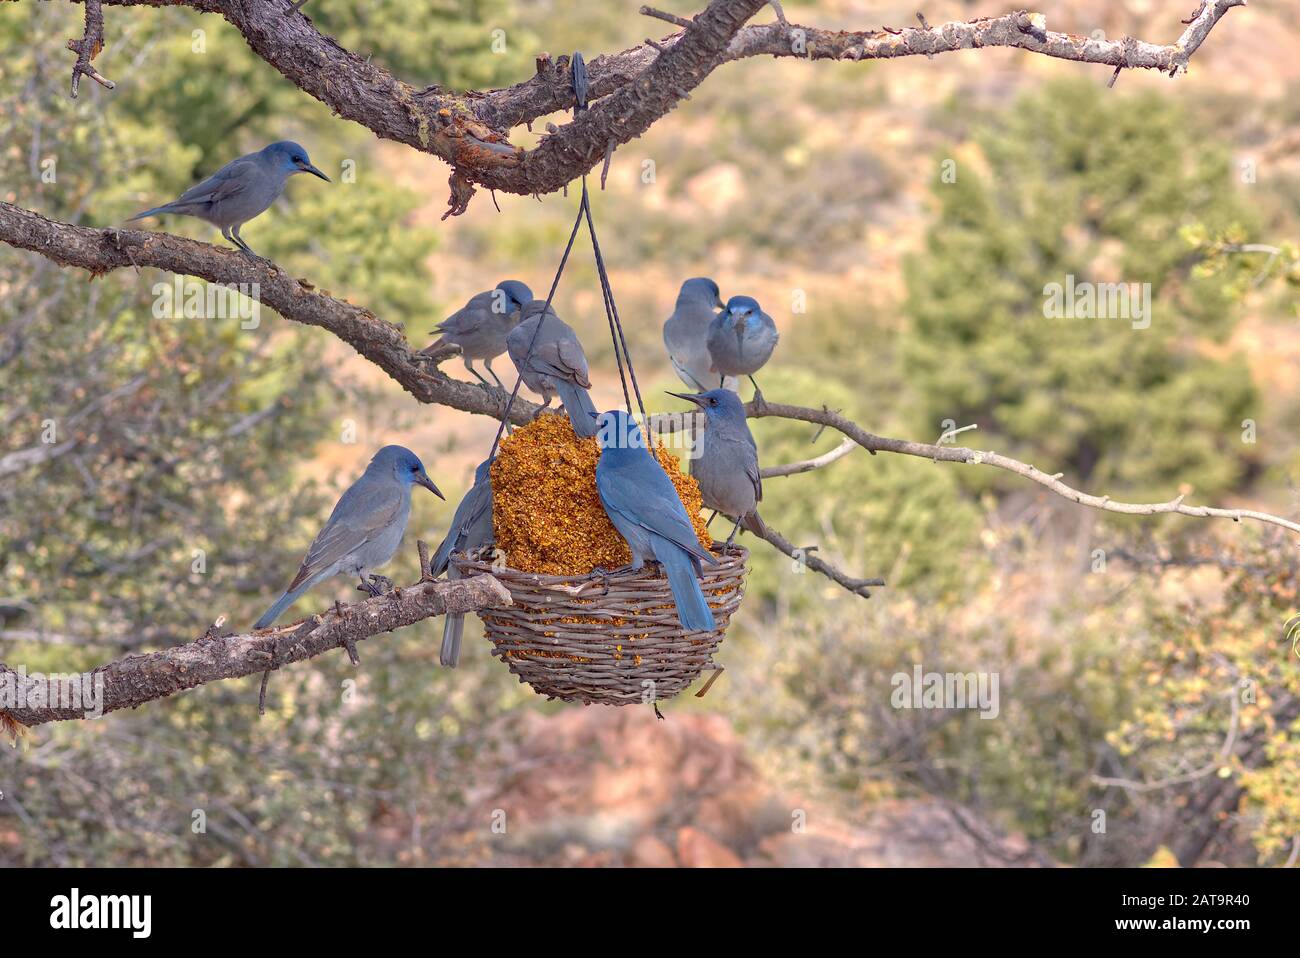 A flock of Pinyon Jays feeding on a basket of bird seed hanging from a Pinon Pine Tree limb. These birds are native to northern areas of Arizona. Stock Photo